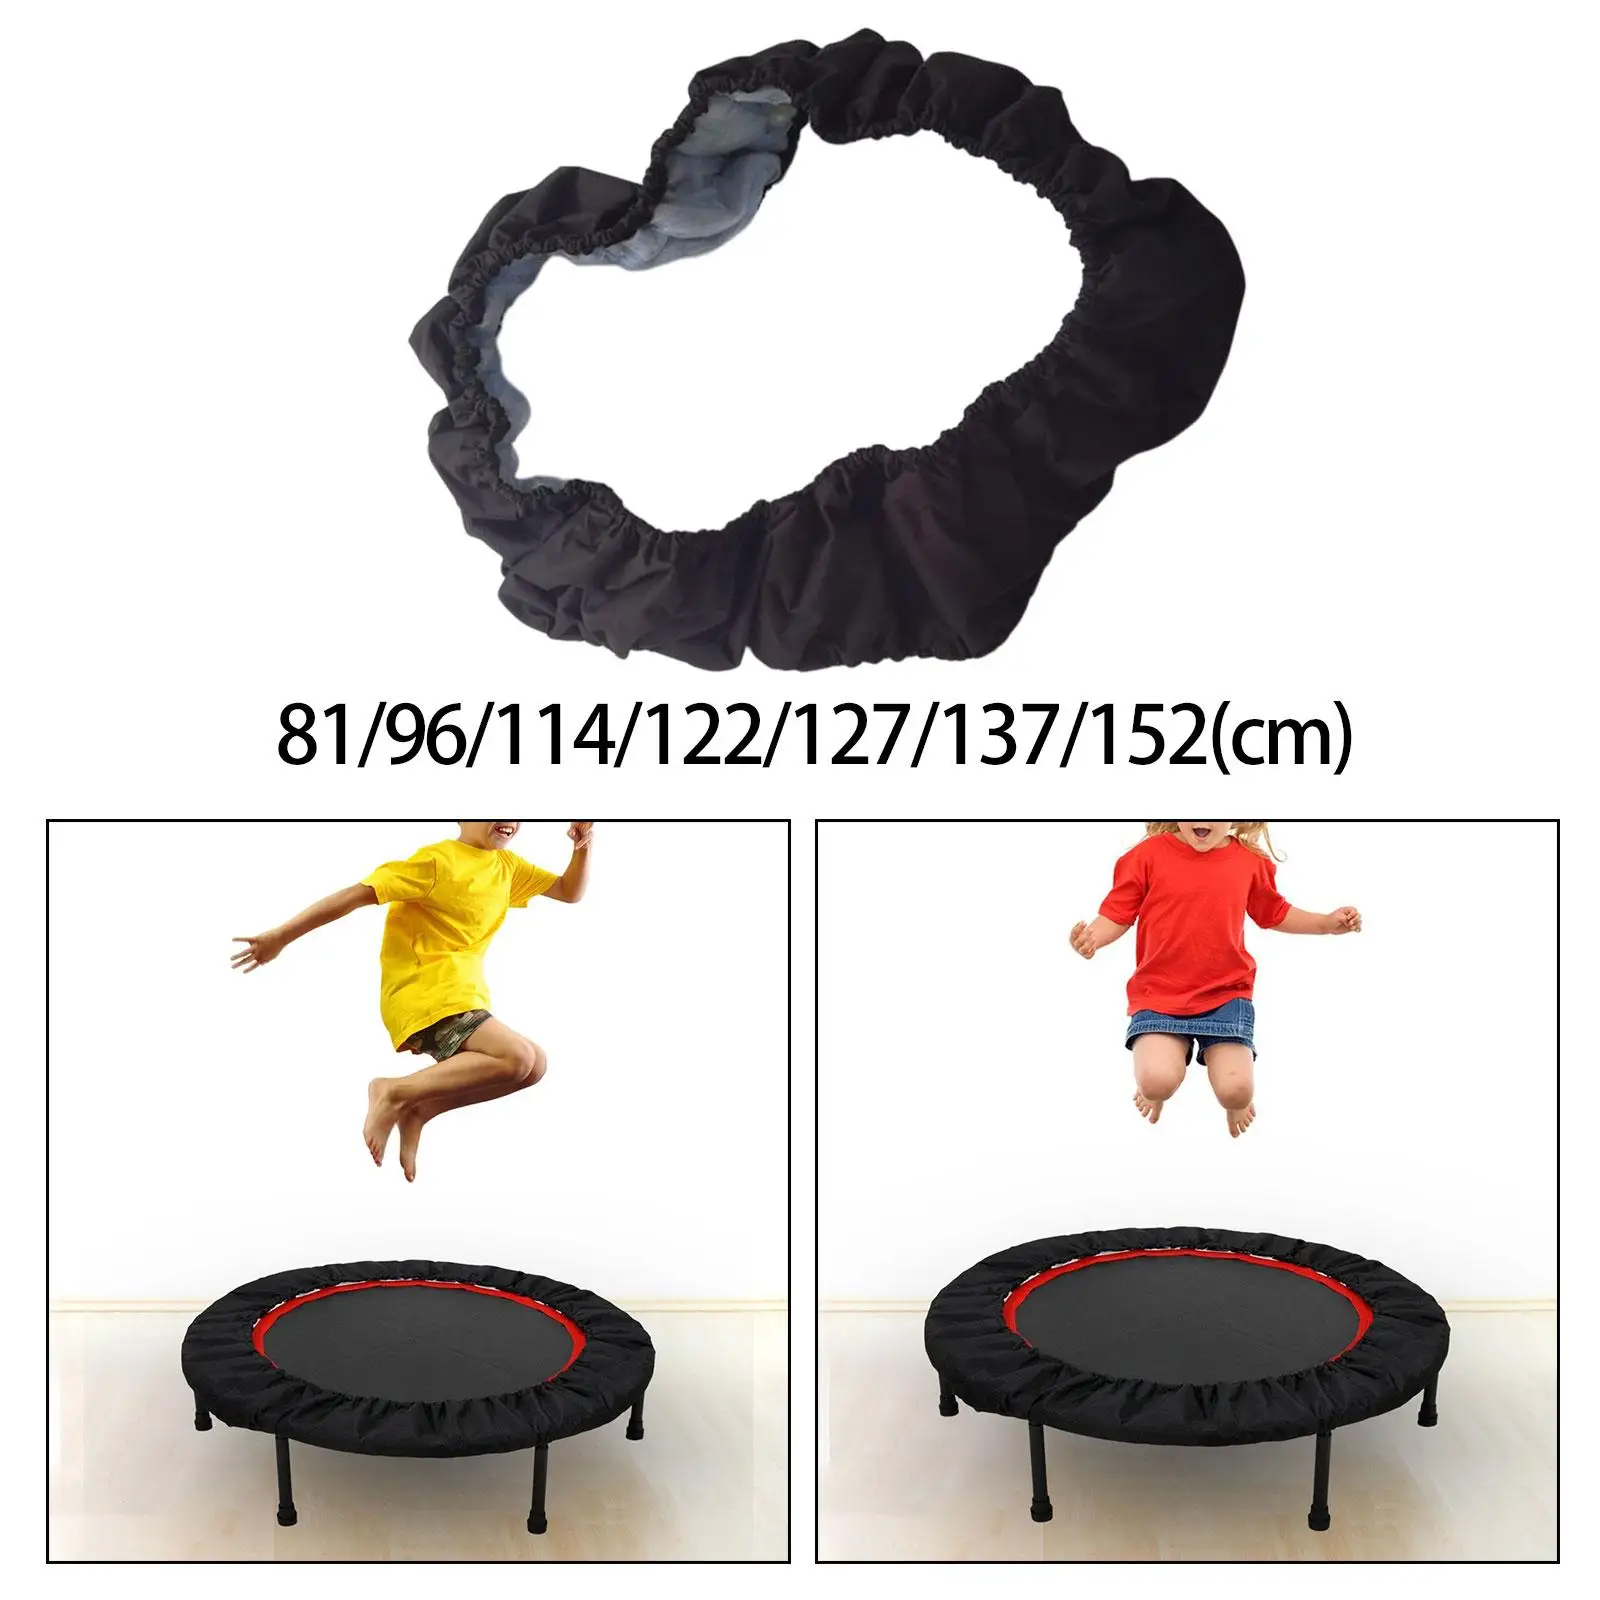 Trampoline Spring Cover Trampoline Cover Round Protective Cover Anti Tearing Durable Edge Protection Replacement